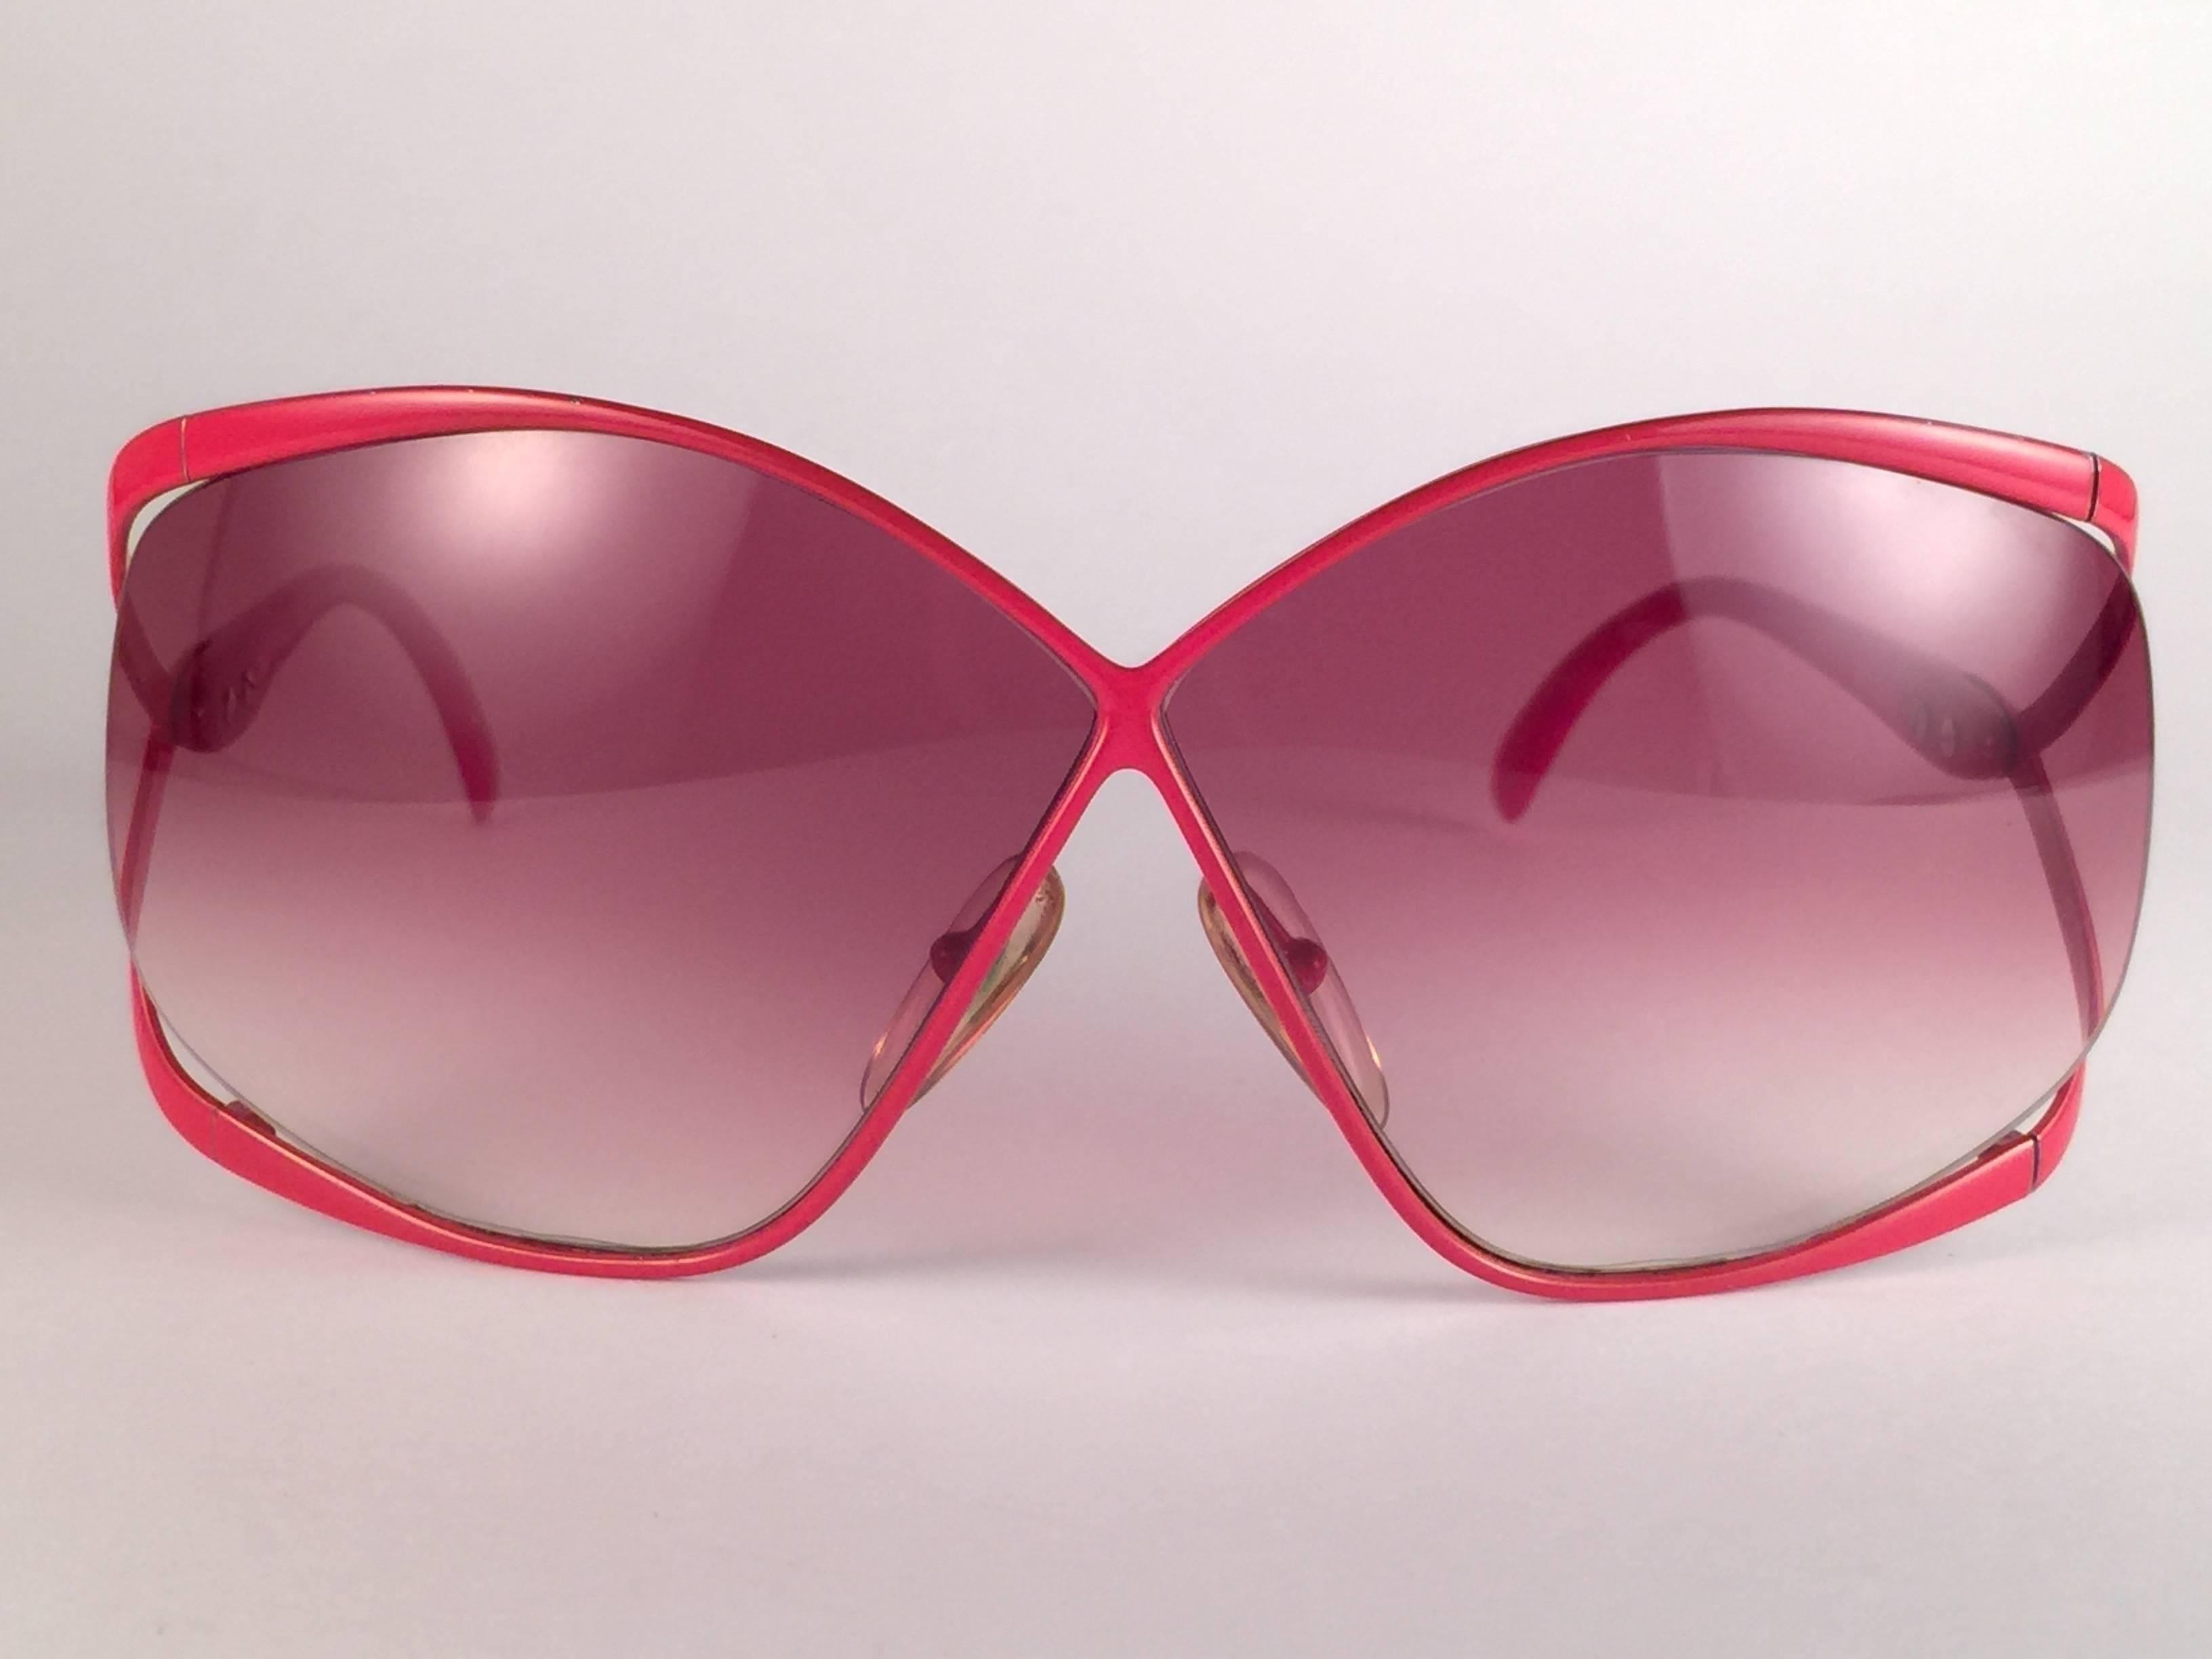 Highly coveted Christian Dior butterly shape in sleek vibrant red. Spotless rose gradient lenses. A collector’s piece!  Come with its original Christian Dior lunettes sleeve.  New, never worn or displayed. Made in Austria.